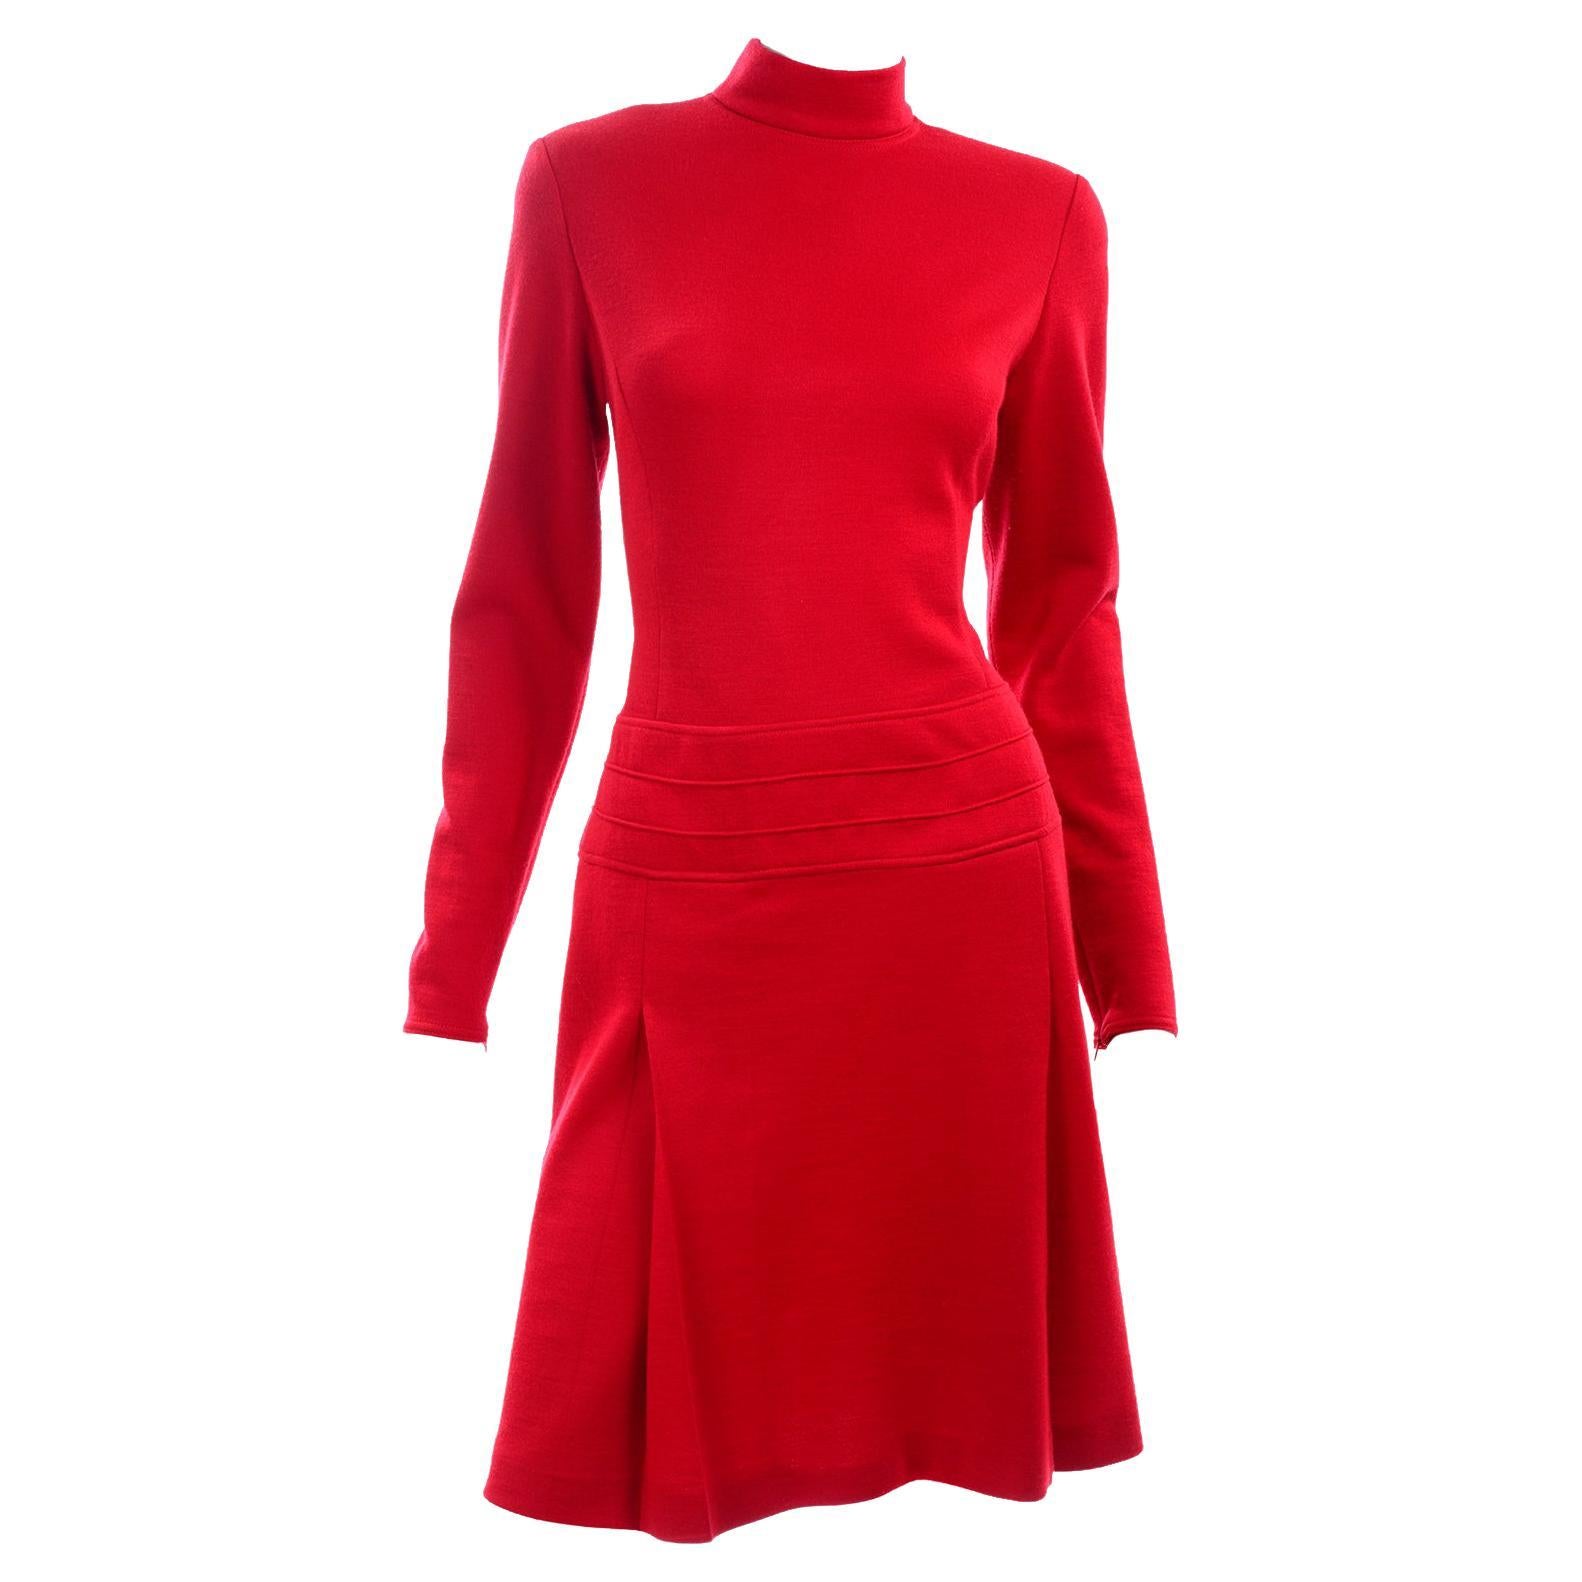 1990s Vintage Claude Montana Red Inverted Pleat Wool Knit Dress 